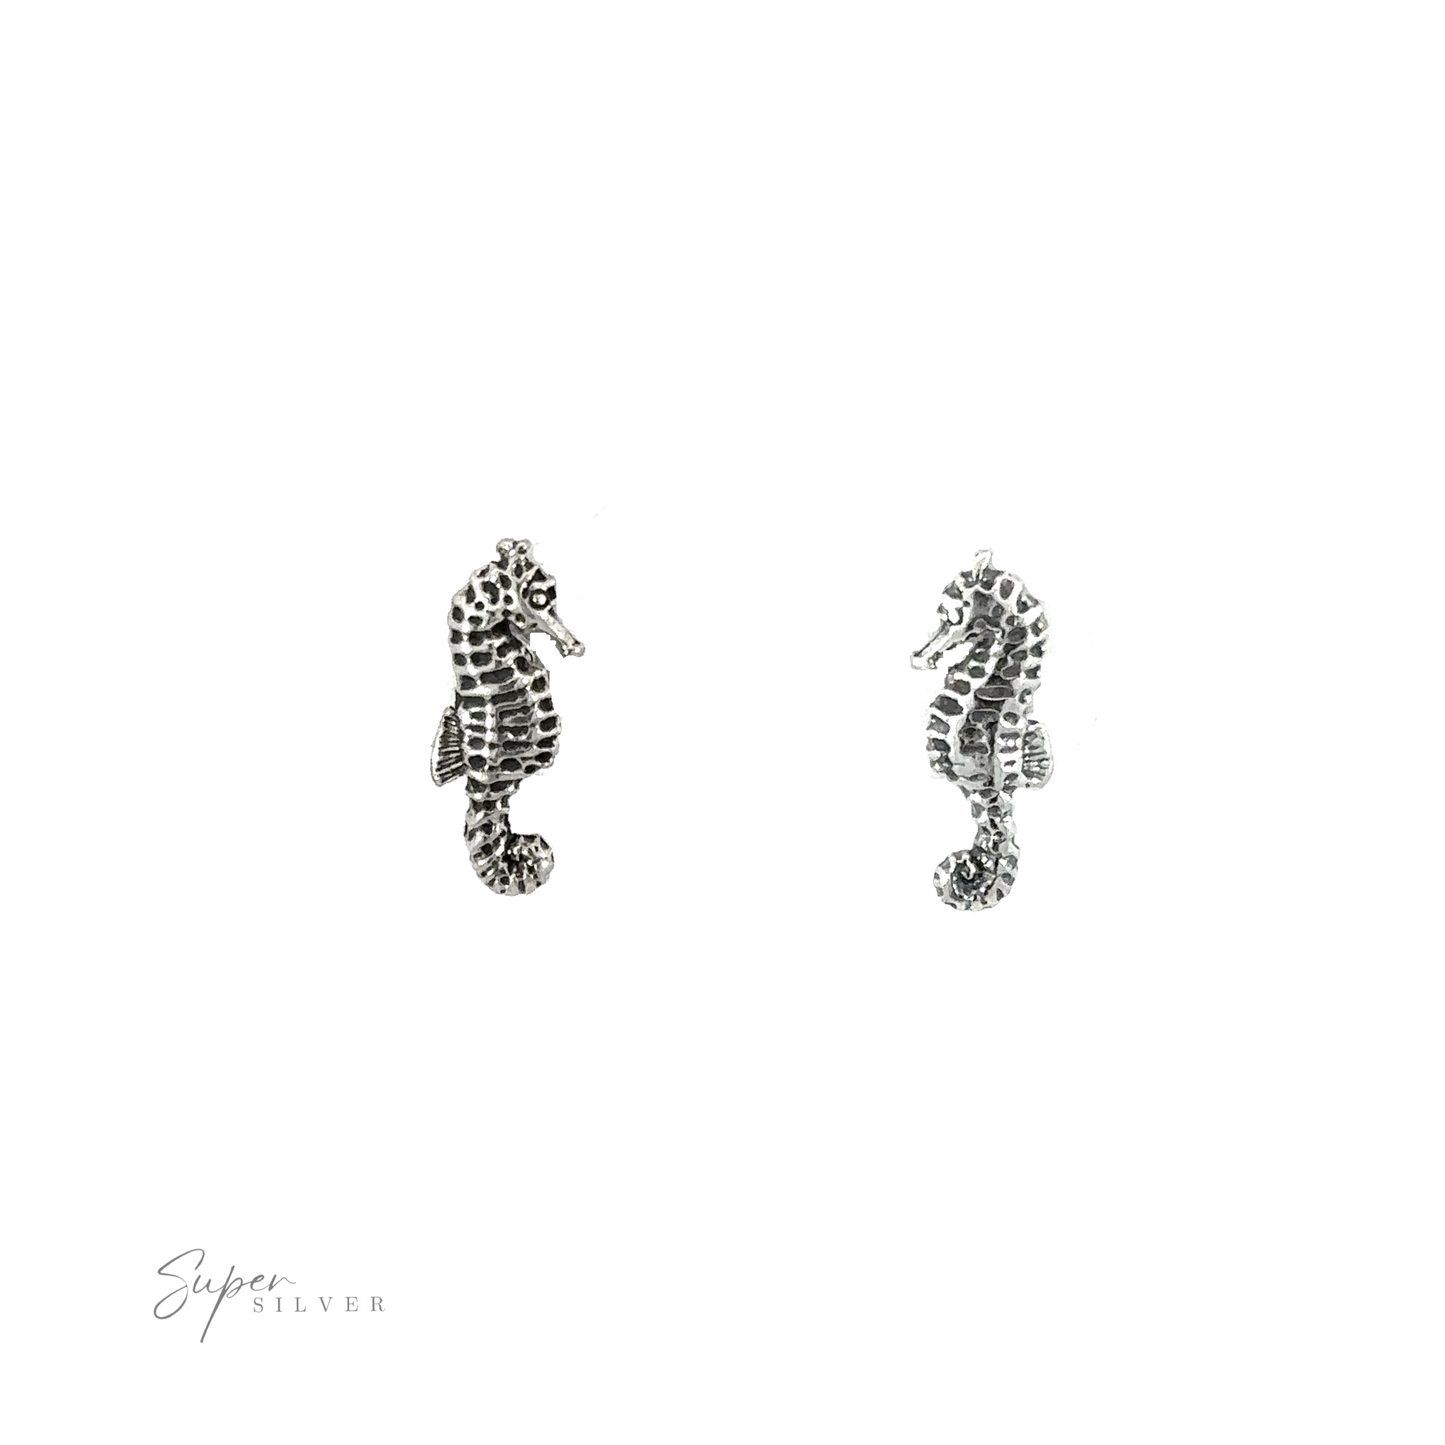 Delicate Seahorse Studs featuring intricate ocean creature details, showcased against a clean white background.